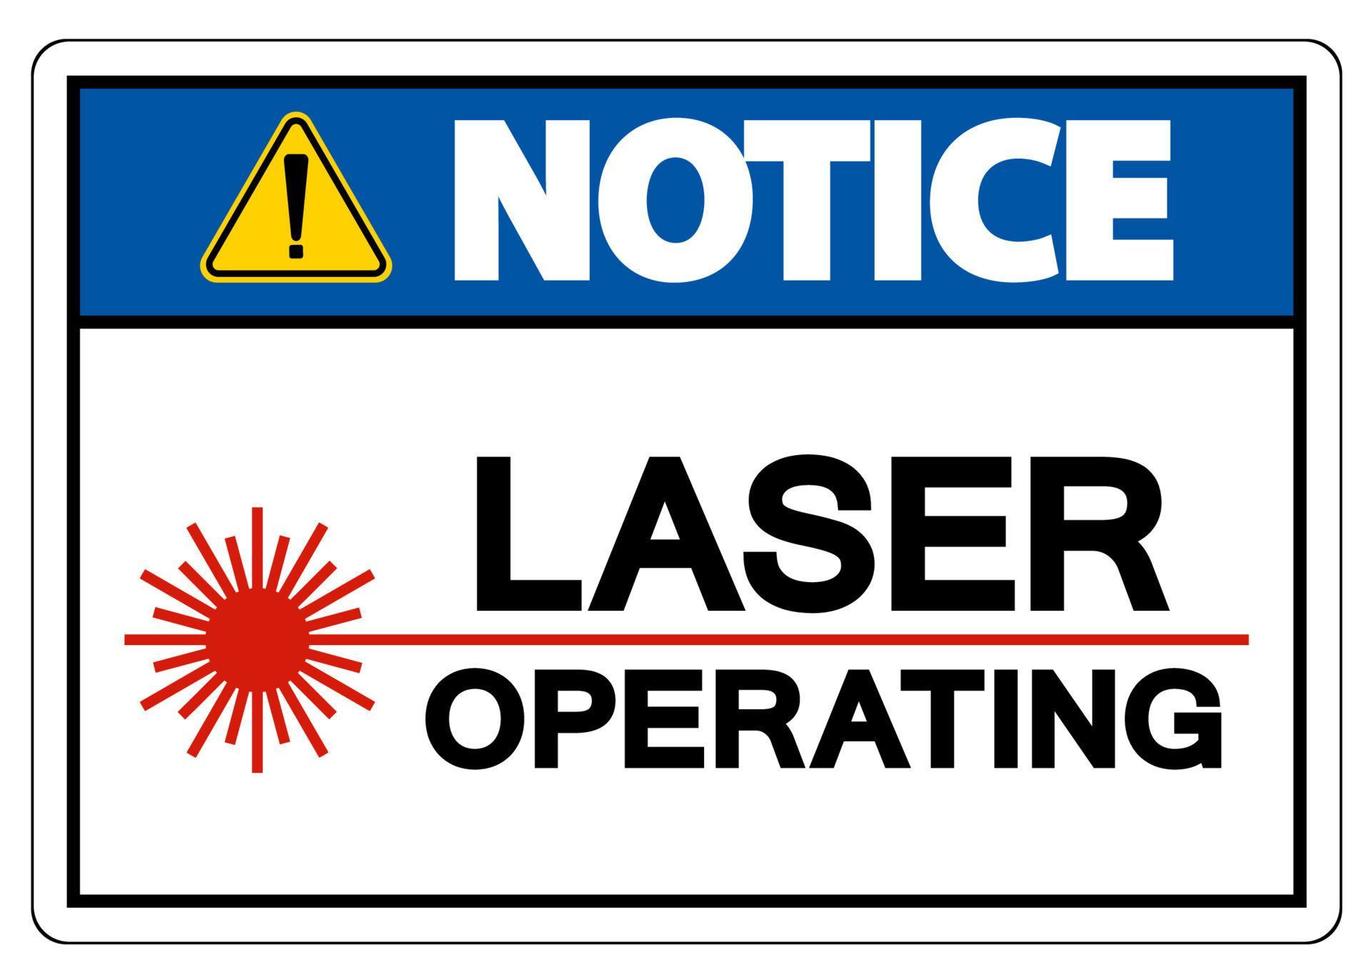 Notice Safety Sign Laser Operating On White Background vector